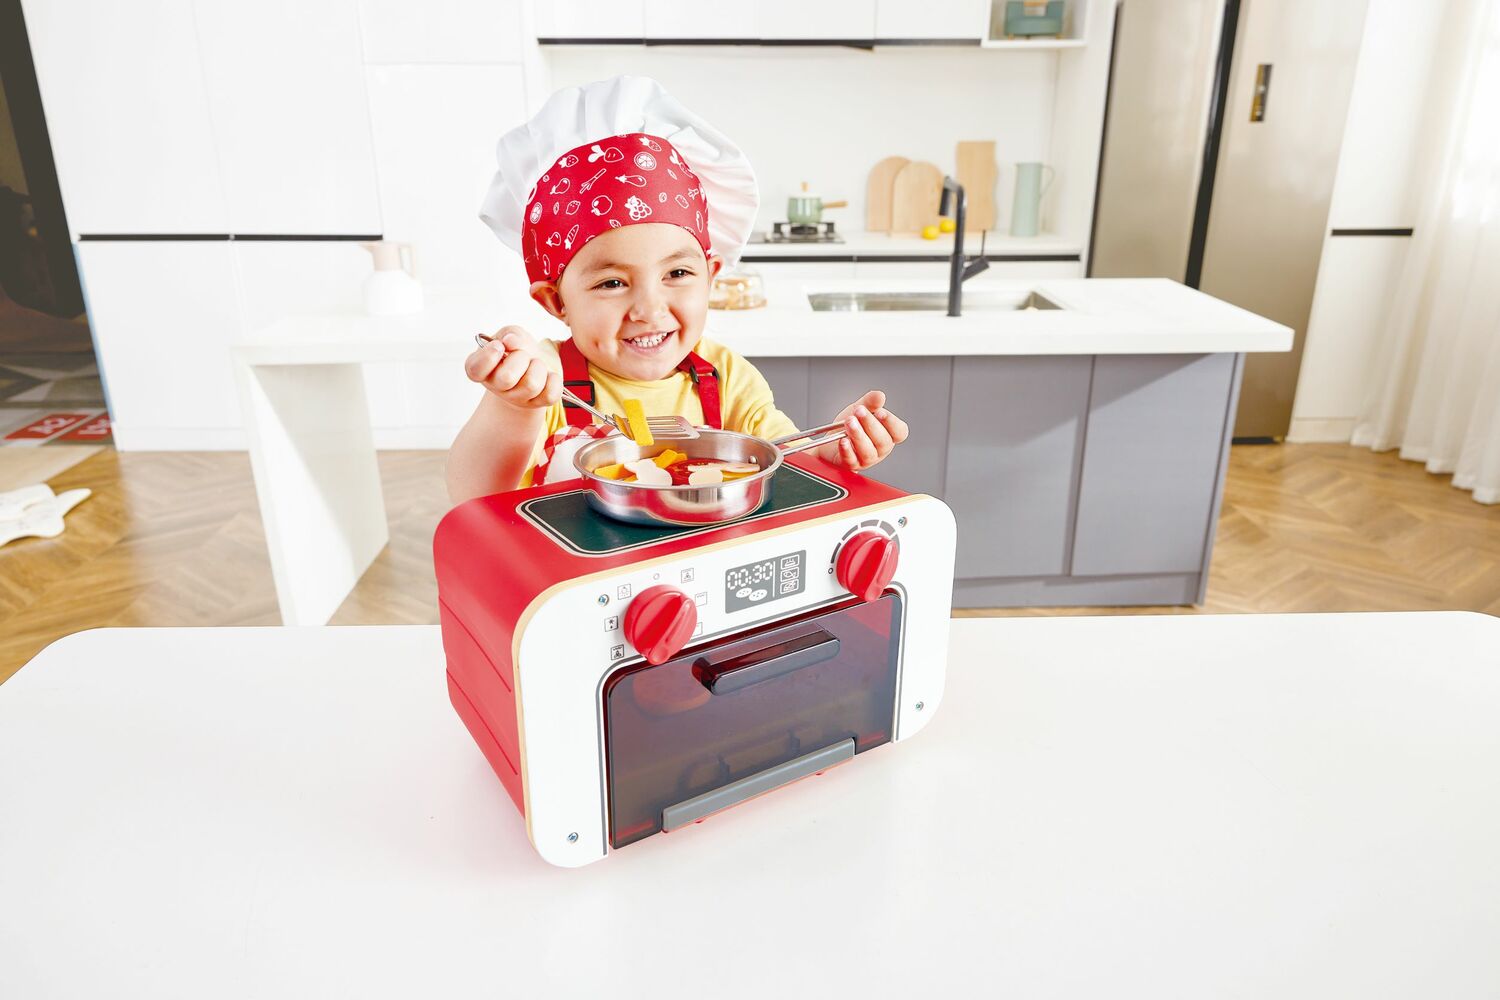 My Baking Oven with Magic Cookies - Imagination Toys